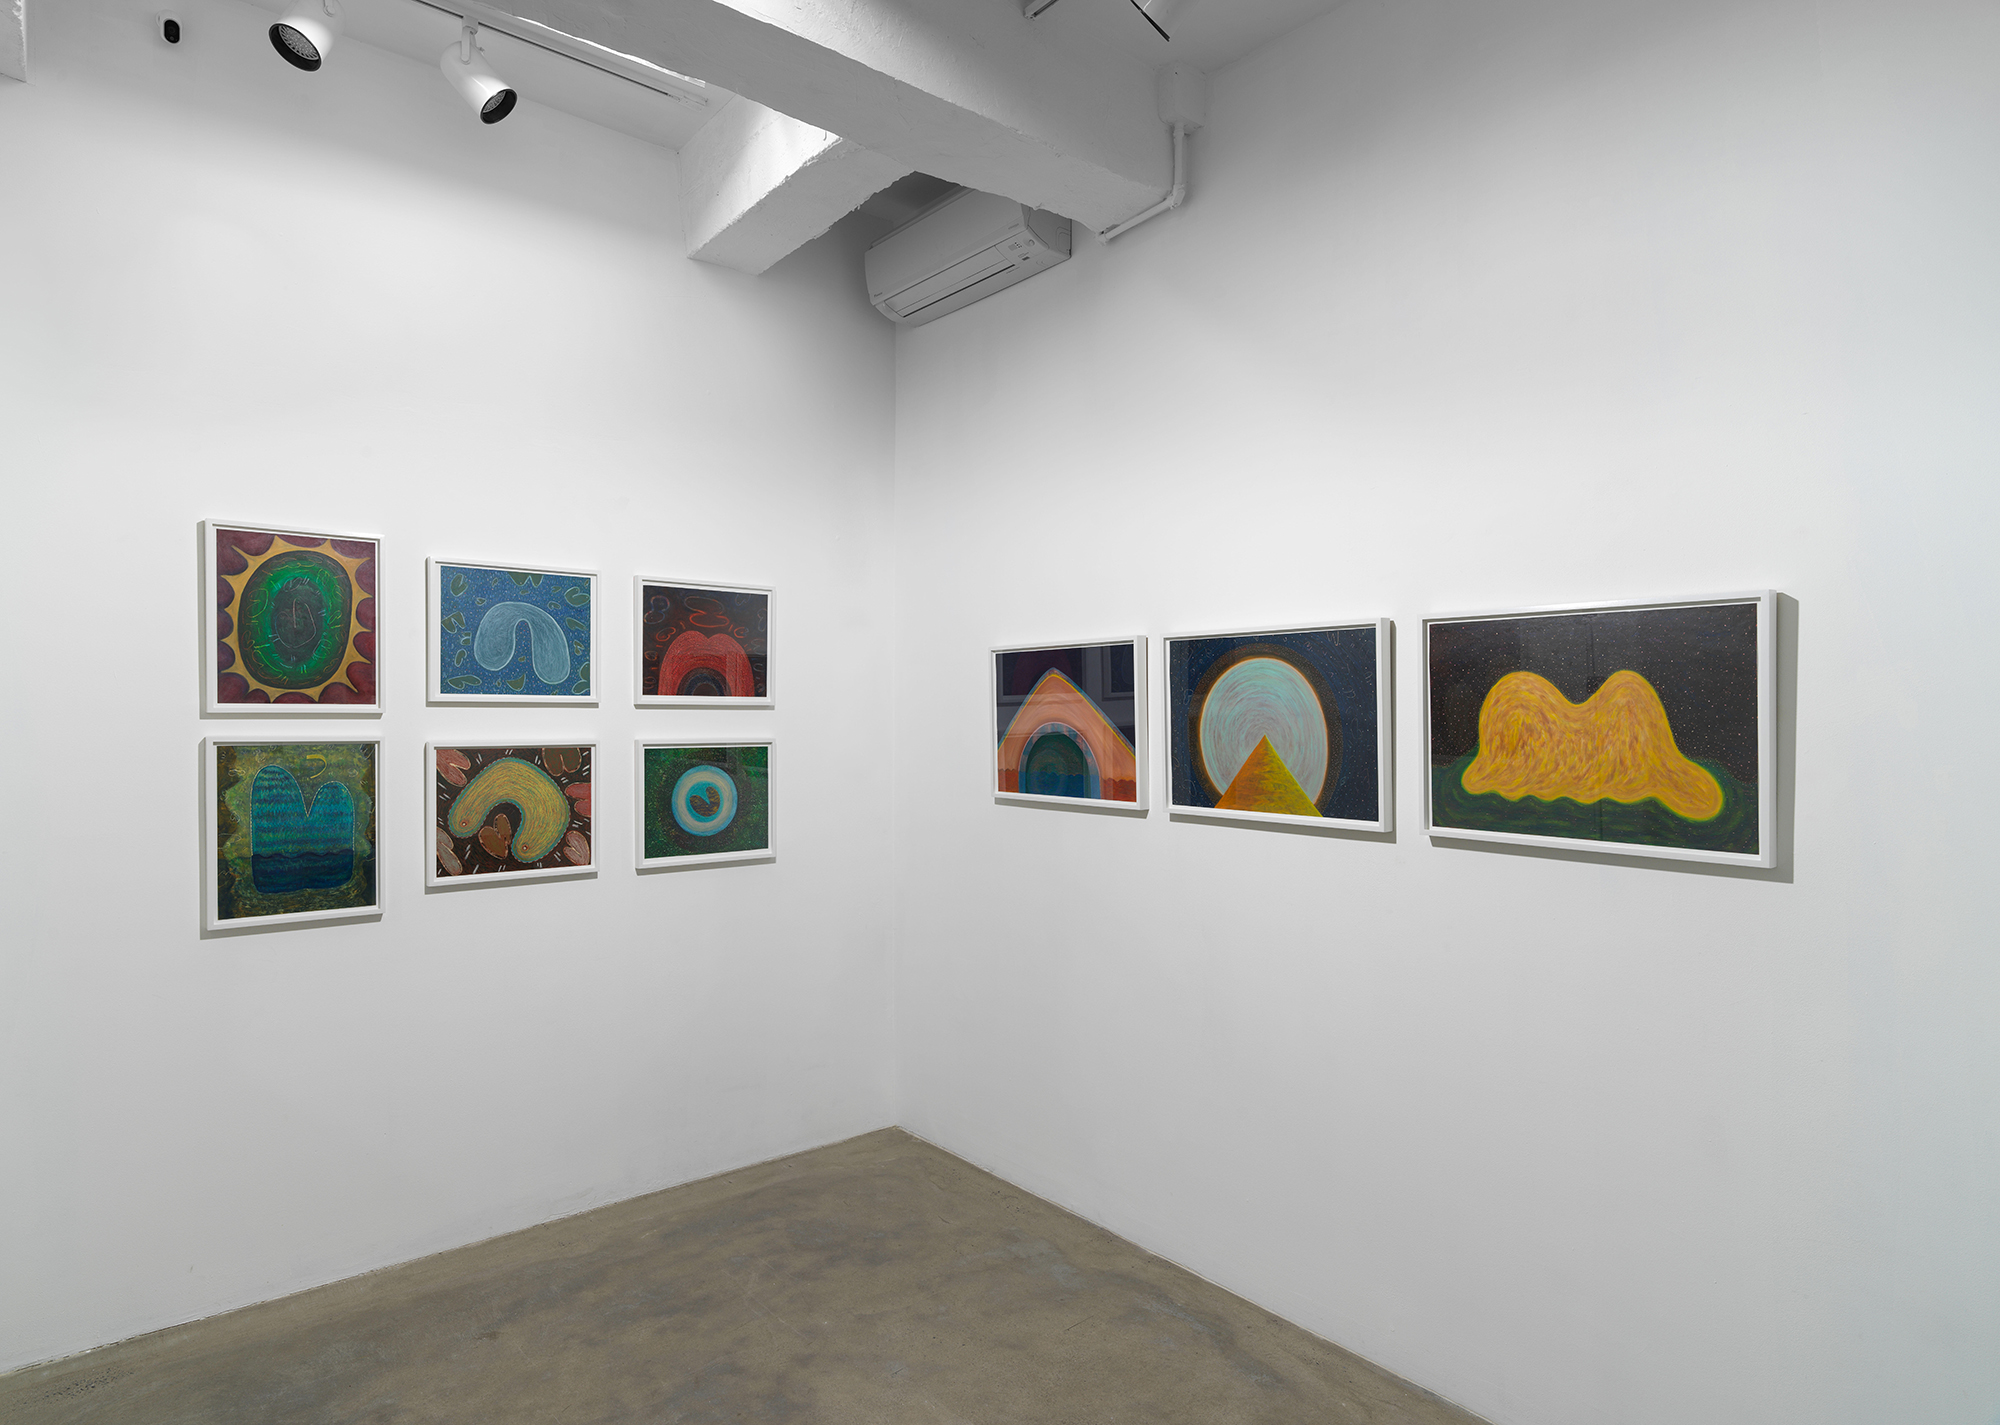 Installation view of works on paper by Ping Zheng showing grid of small works and row of larger works